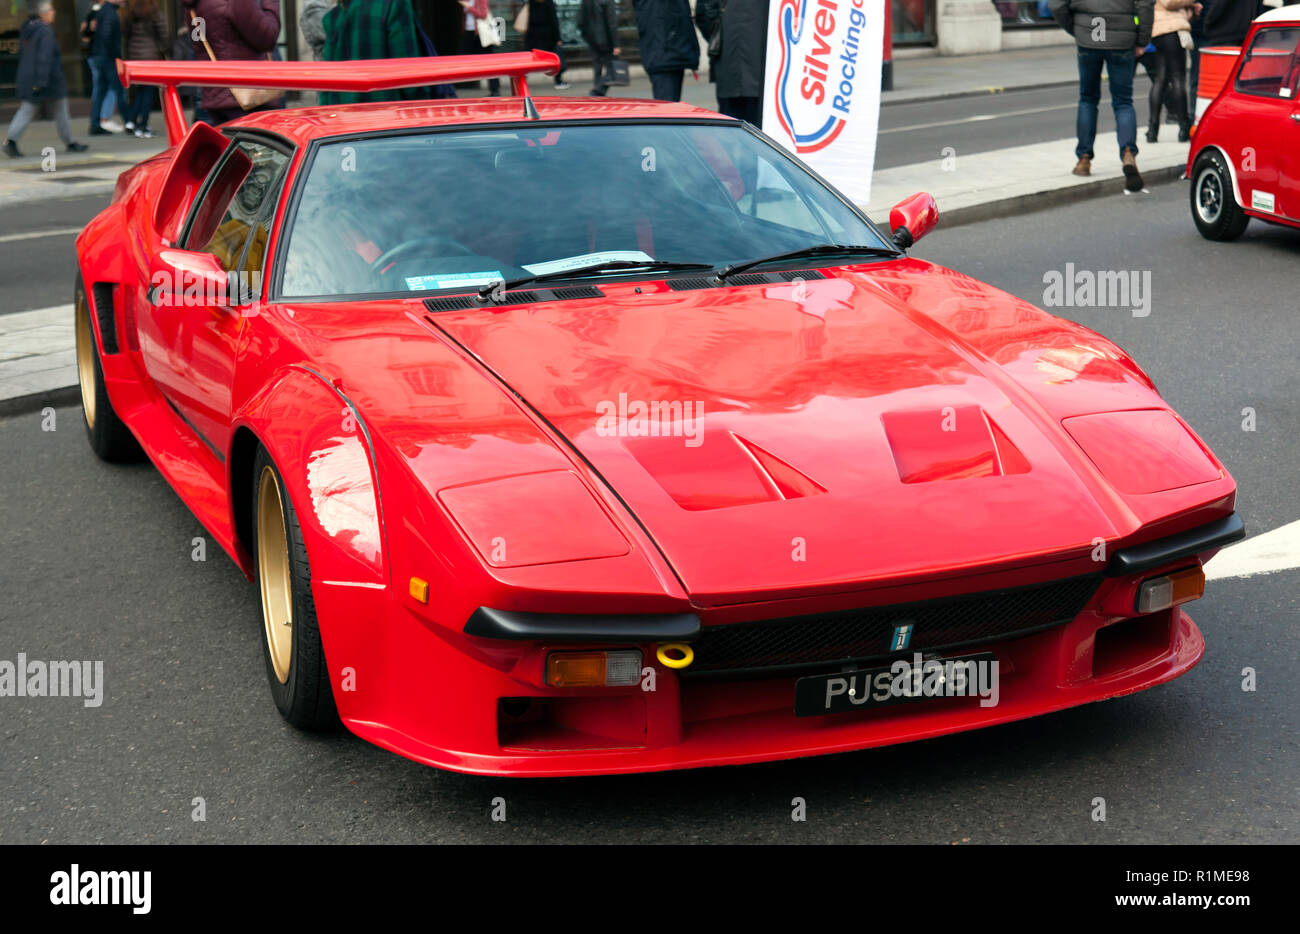 Three-quarter front view of a De Tomaso Pantera  GTS  on display at the Regents Street Motor Show 2018 Stock Photo